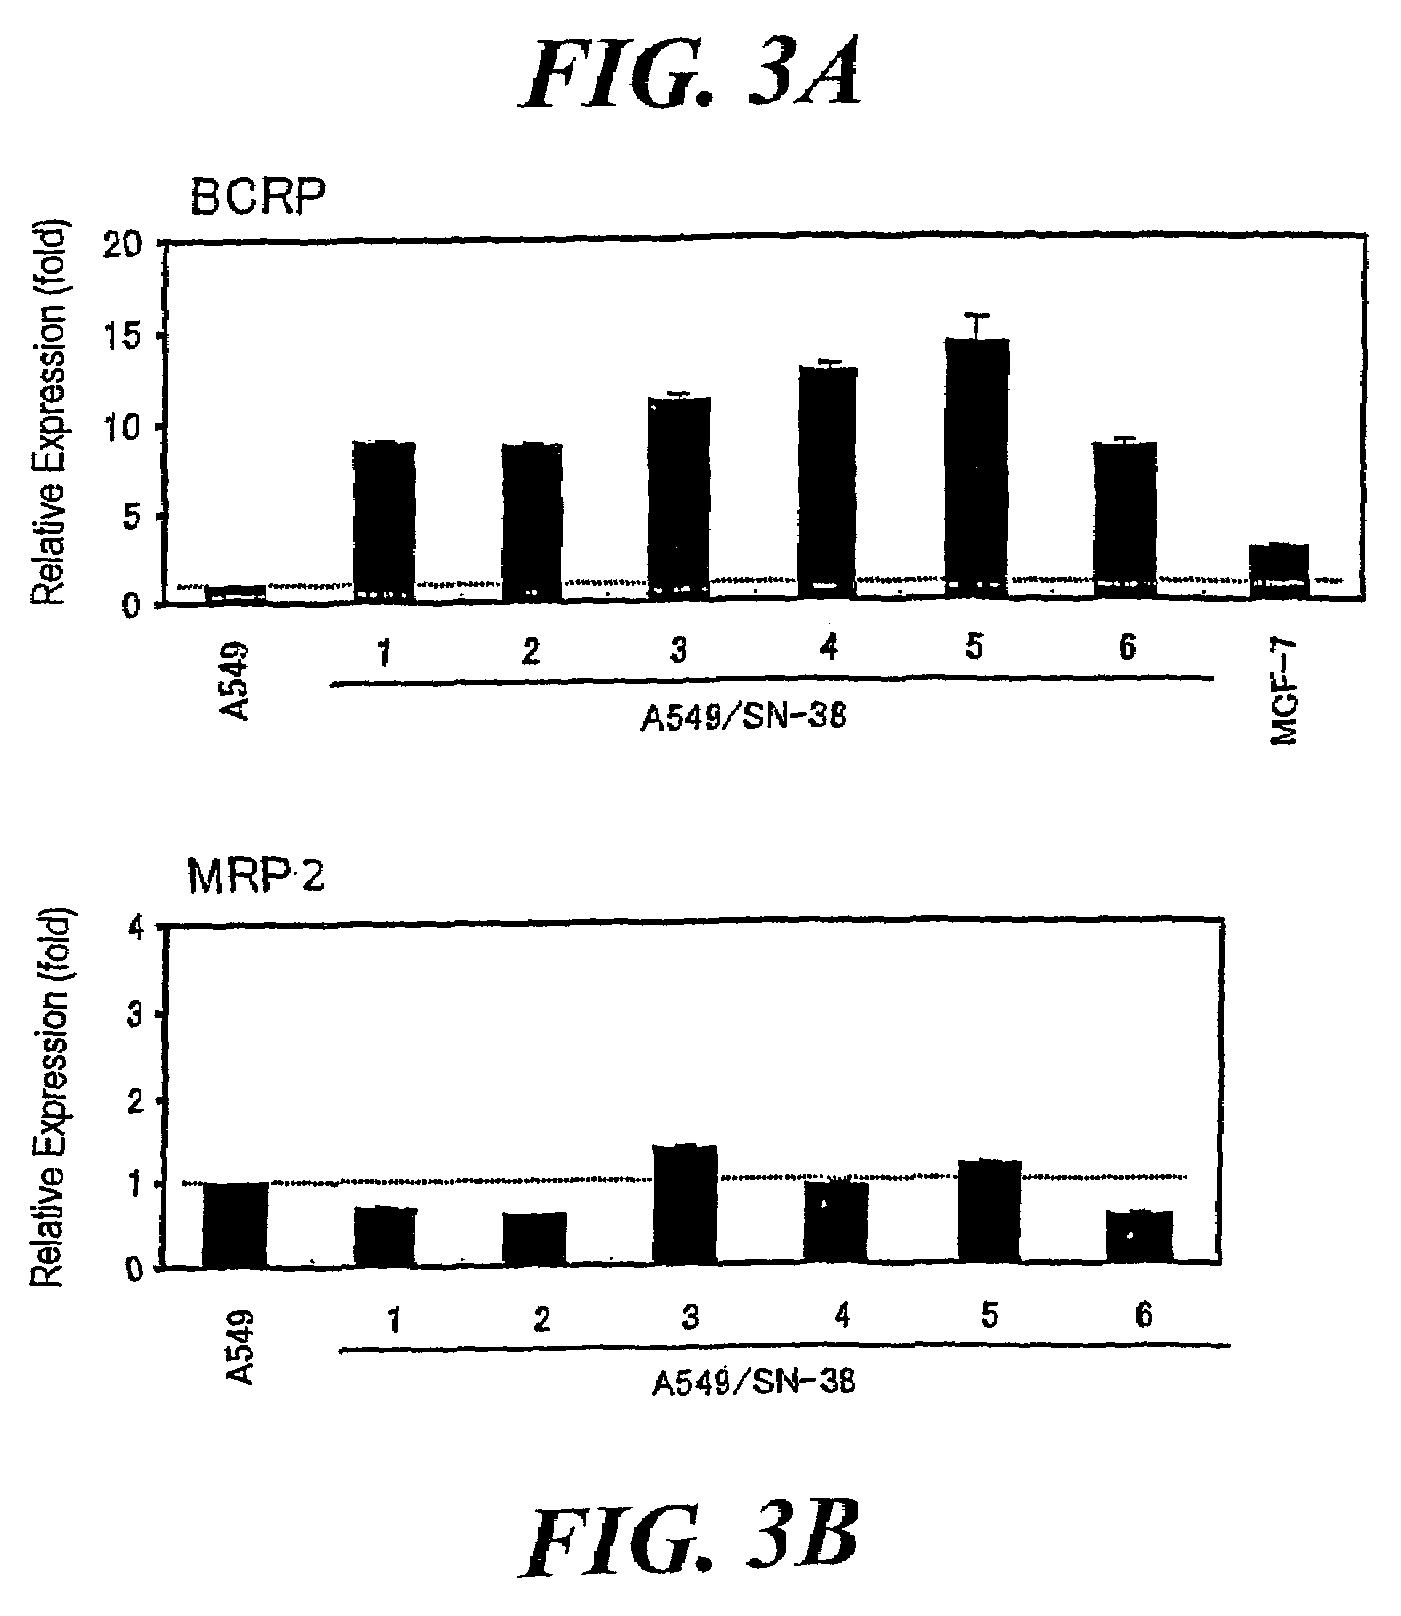 Breast cancer resistance protein (<i>BCRP</i>) inhibitor